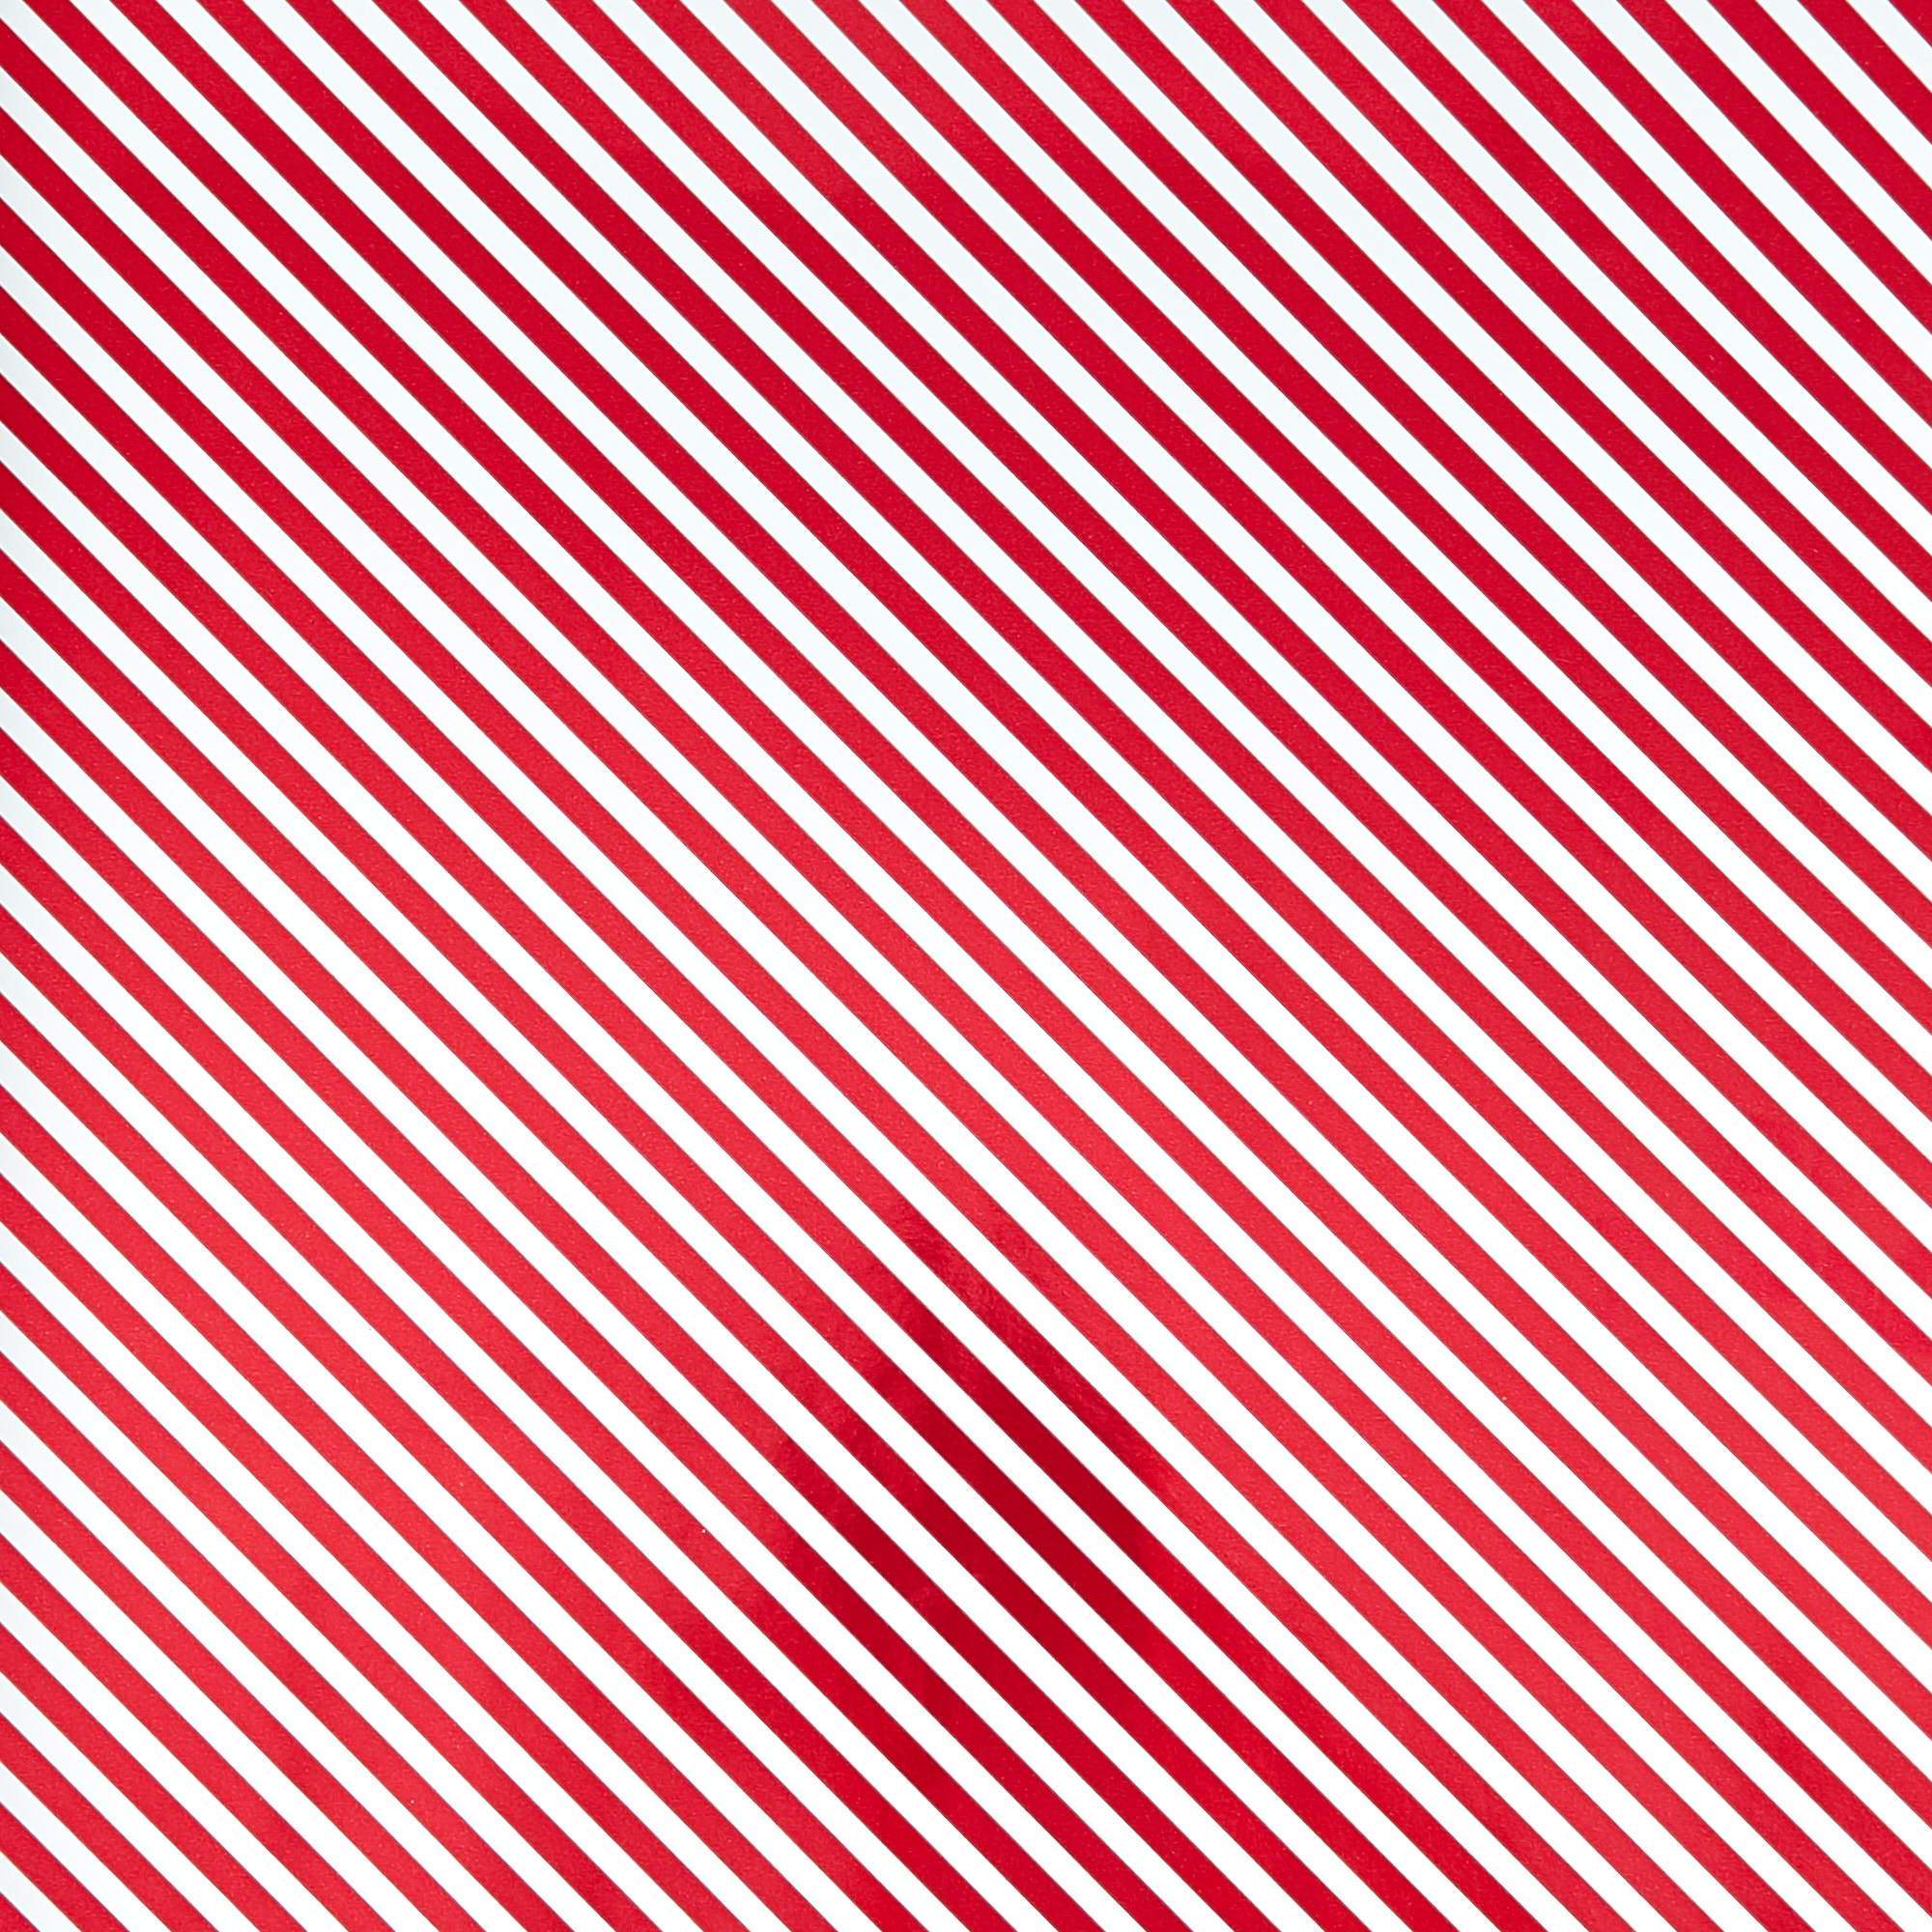 Candy Cane Stripes Foil Wrapping Paper - 4 Rolls